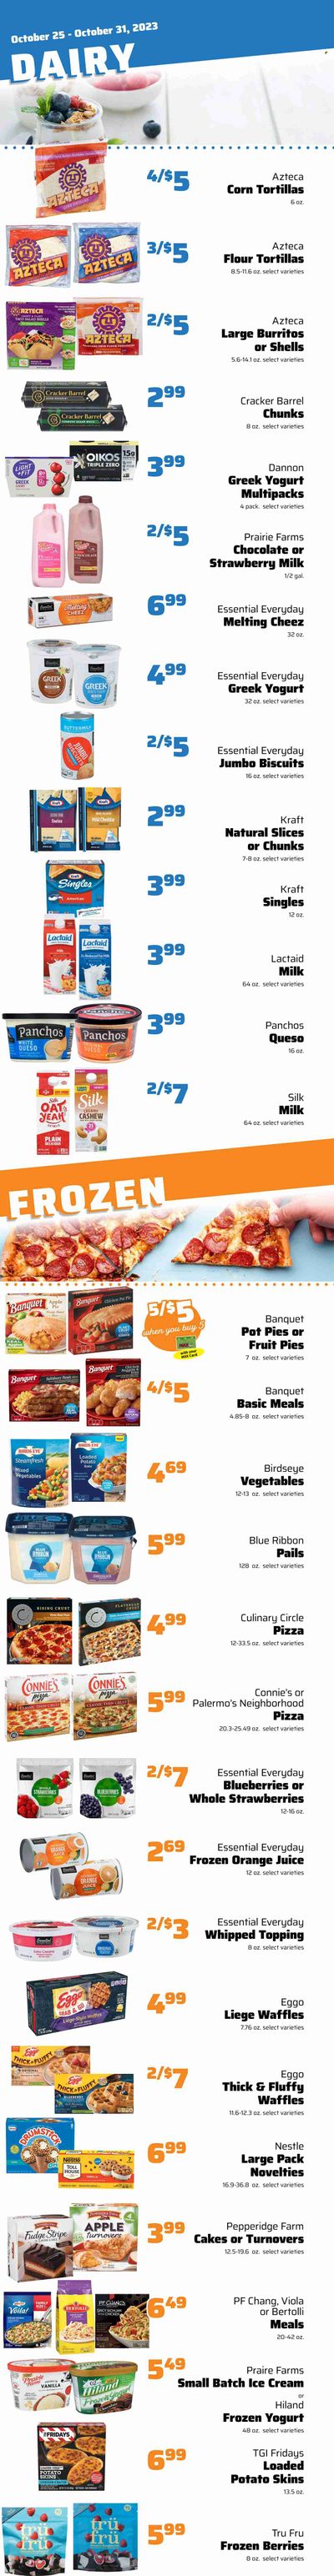 County Market (IL, IN, MO) Weekly Ad Flyer Specials October 25 to October 31, 2023